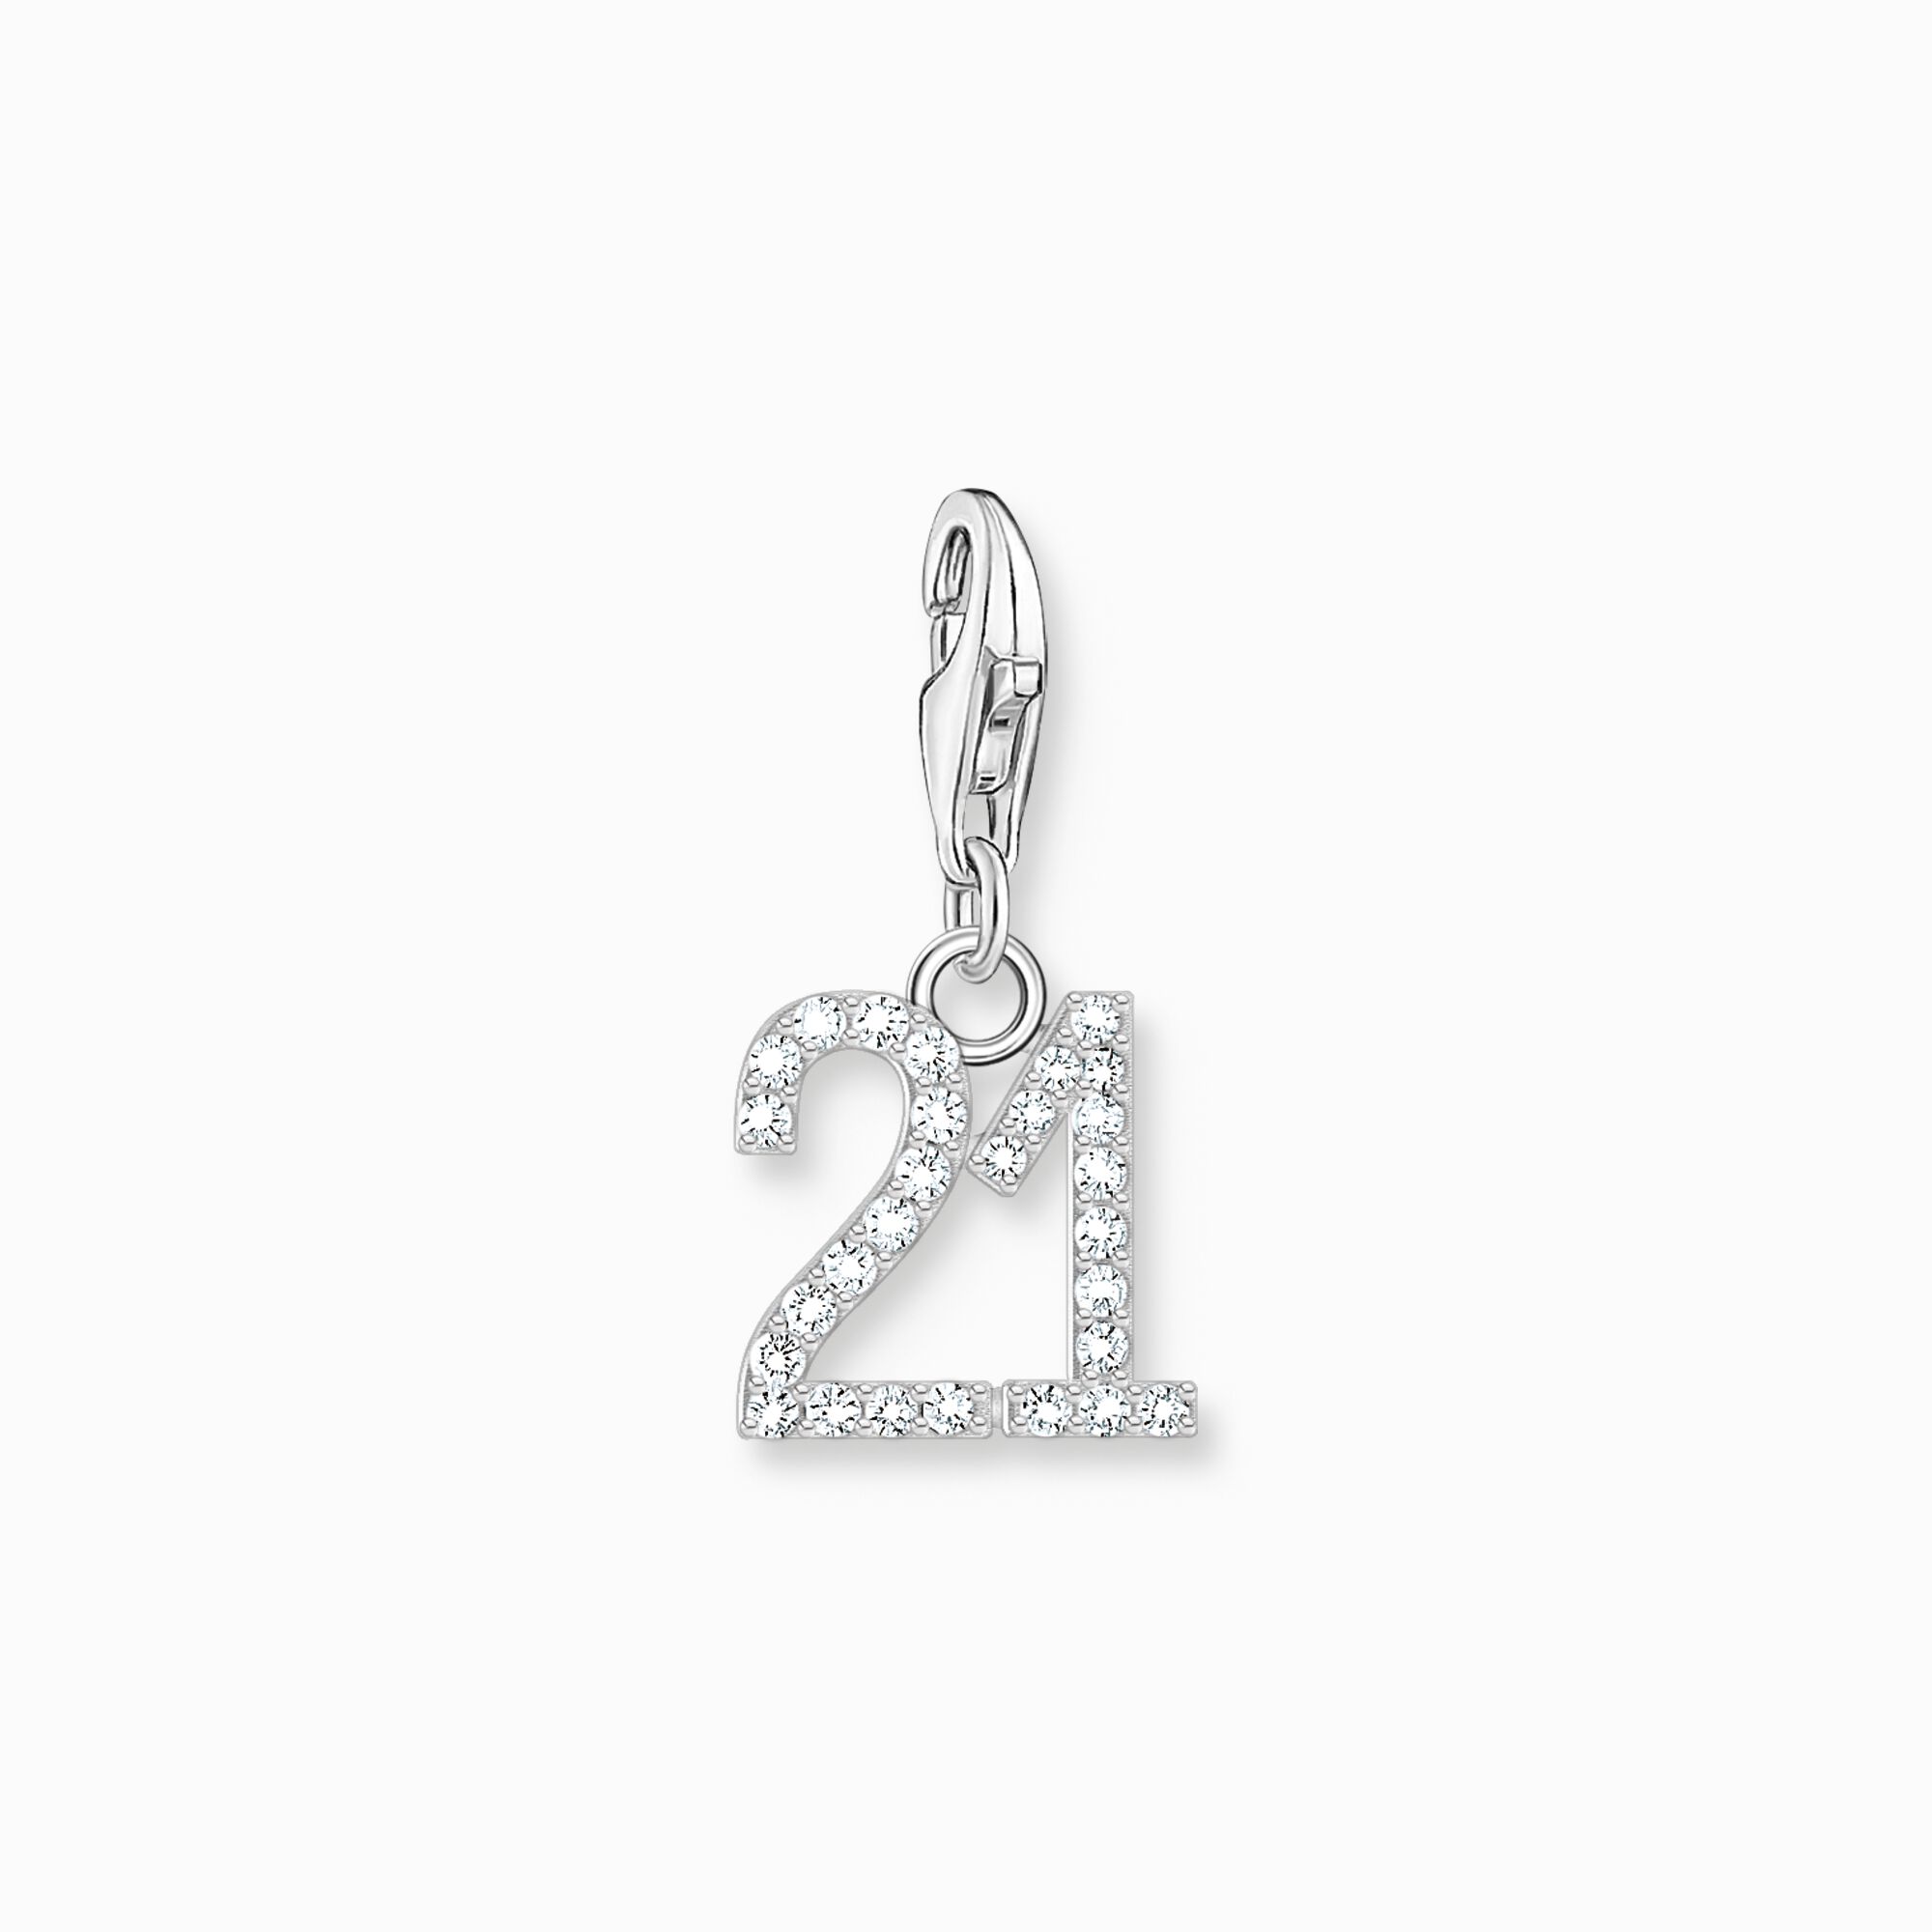 Silver charm pendant number 21 with zirconia from the Charm Club collection in the THOMAS SABO online store